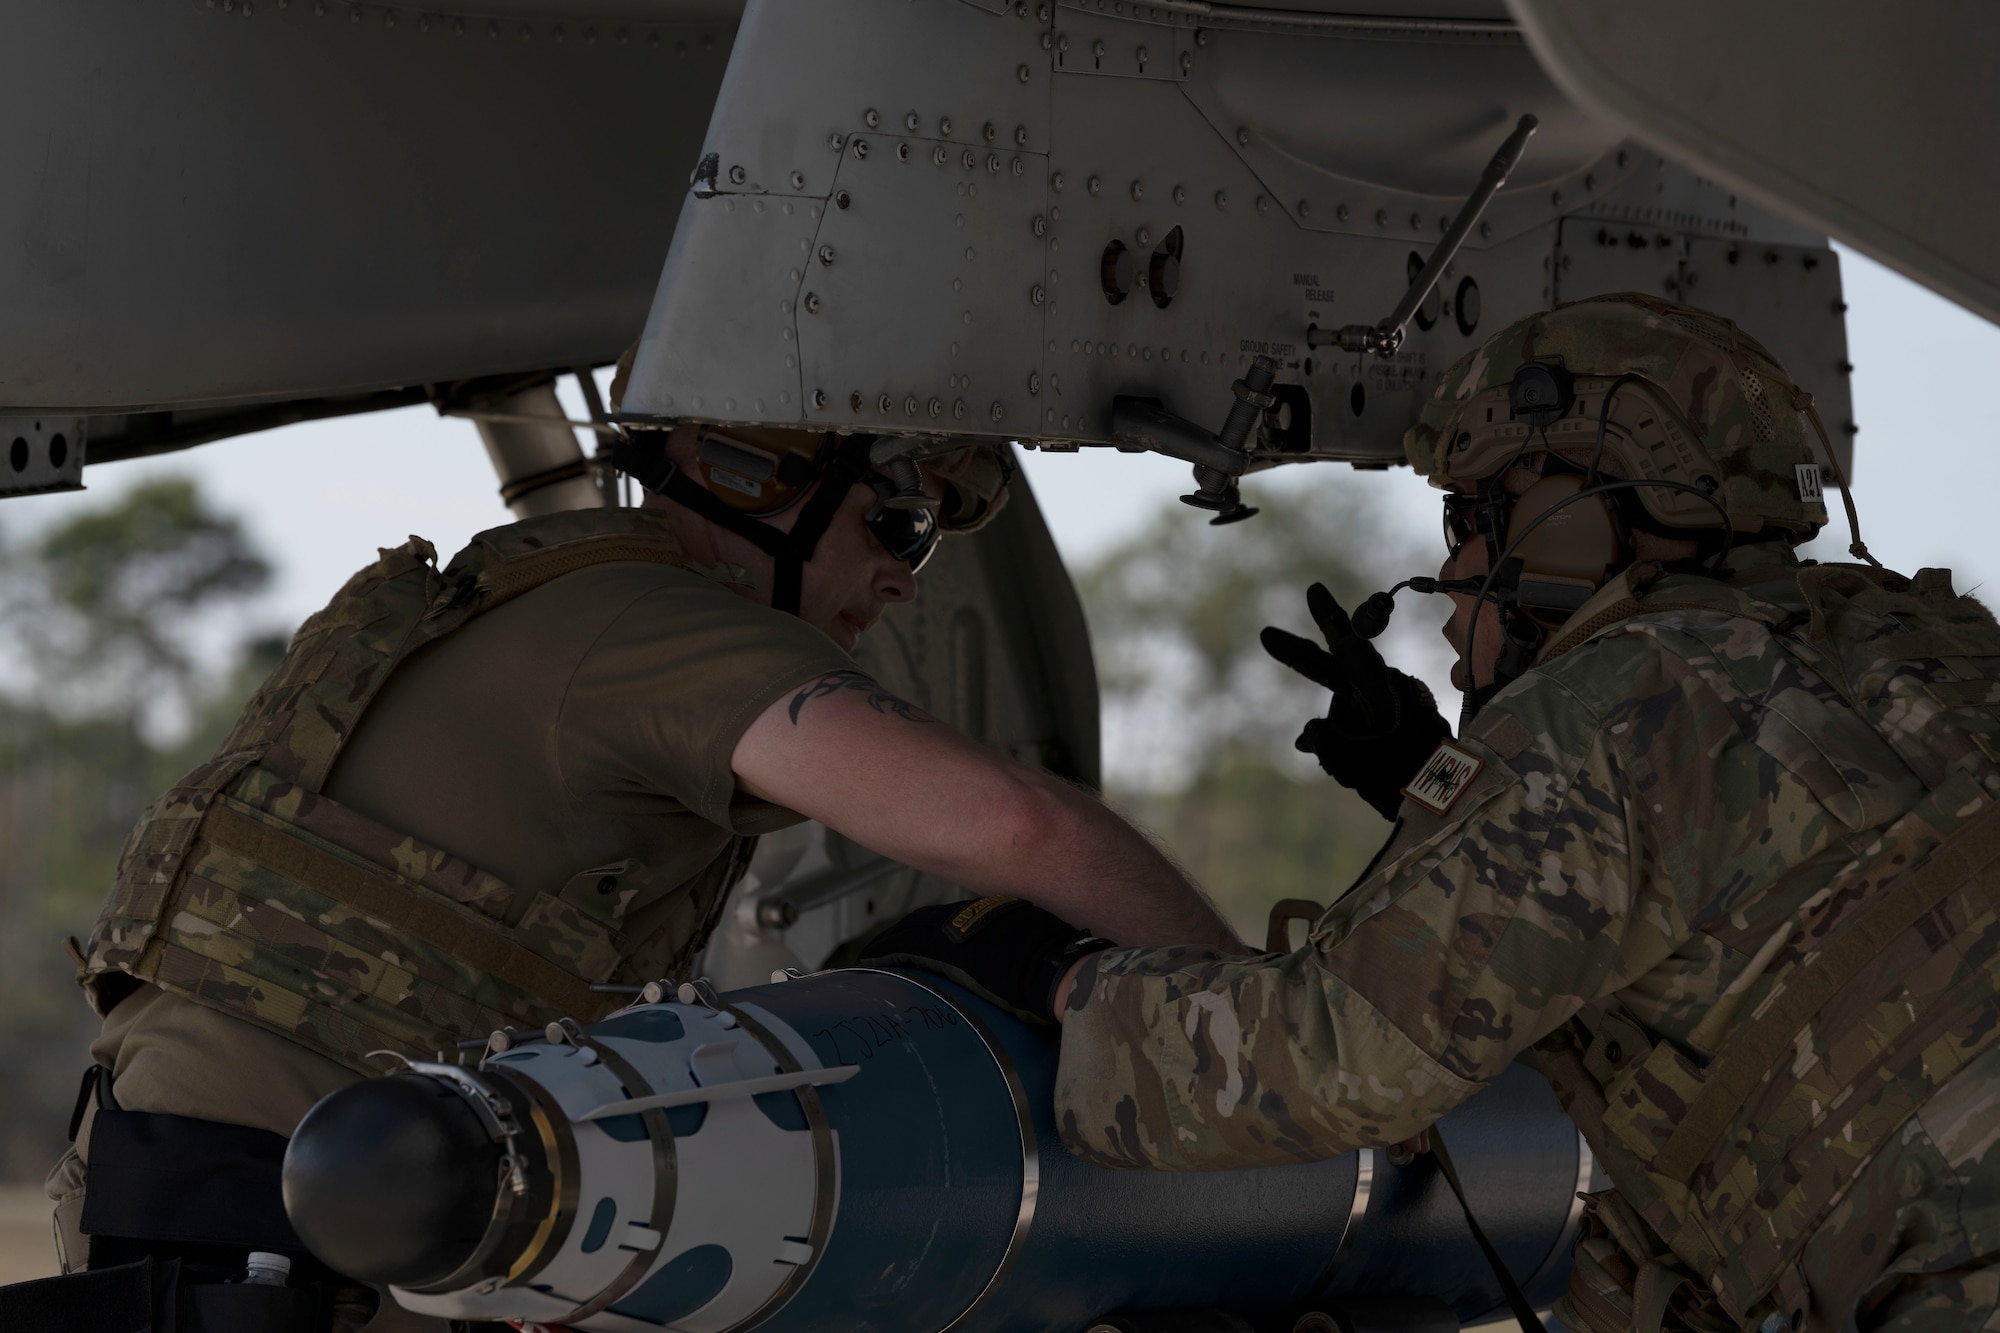 U.S. Airmen assigned to the 127th Wing, Michigan Air National Guard, load practice bombs onto an A-10 Thunderbolt II aircraft during the Agile Rage exercise, Avon Park, Florida, Feb. 27, 2024. Agile Rage 2024 is a National Guard Bureau (NGB)/A3 led military exercise, hosted at the Air Dominance Center, taking place from February 26 to March 8, 2024 that involves the collaborative efforts of various Air National Guard Wings conducting joint counter-land and combat search and rescue (CSAR) operations in a simulated medium to high threat environment. (U.S. Air National Guard photo by Master Sgt. Rafael D. Rosa)